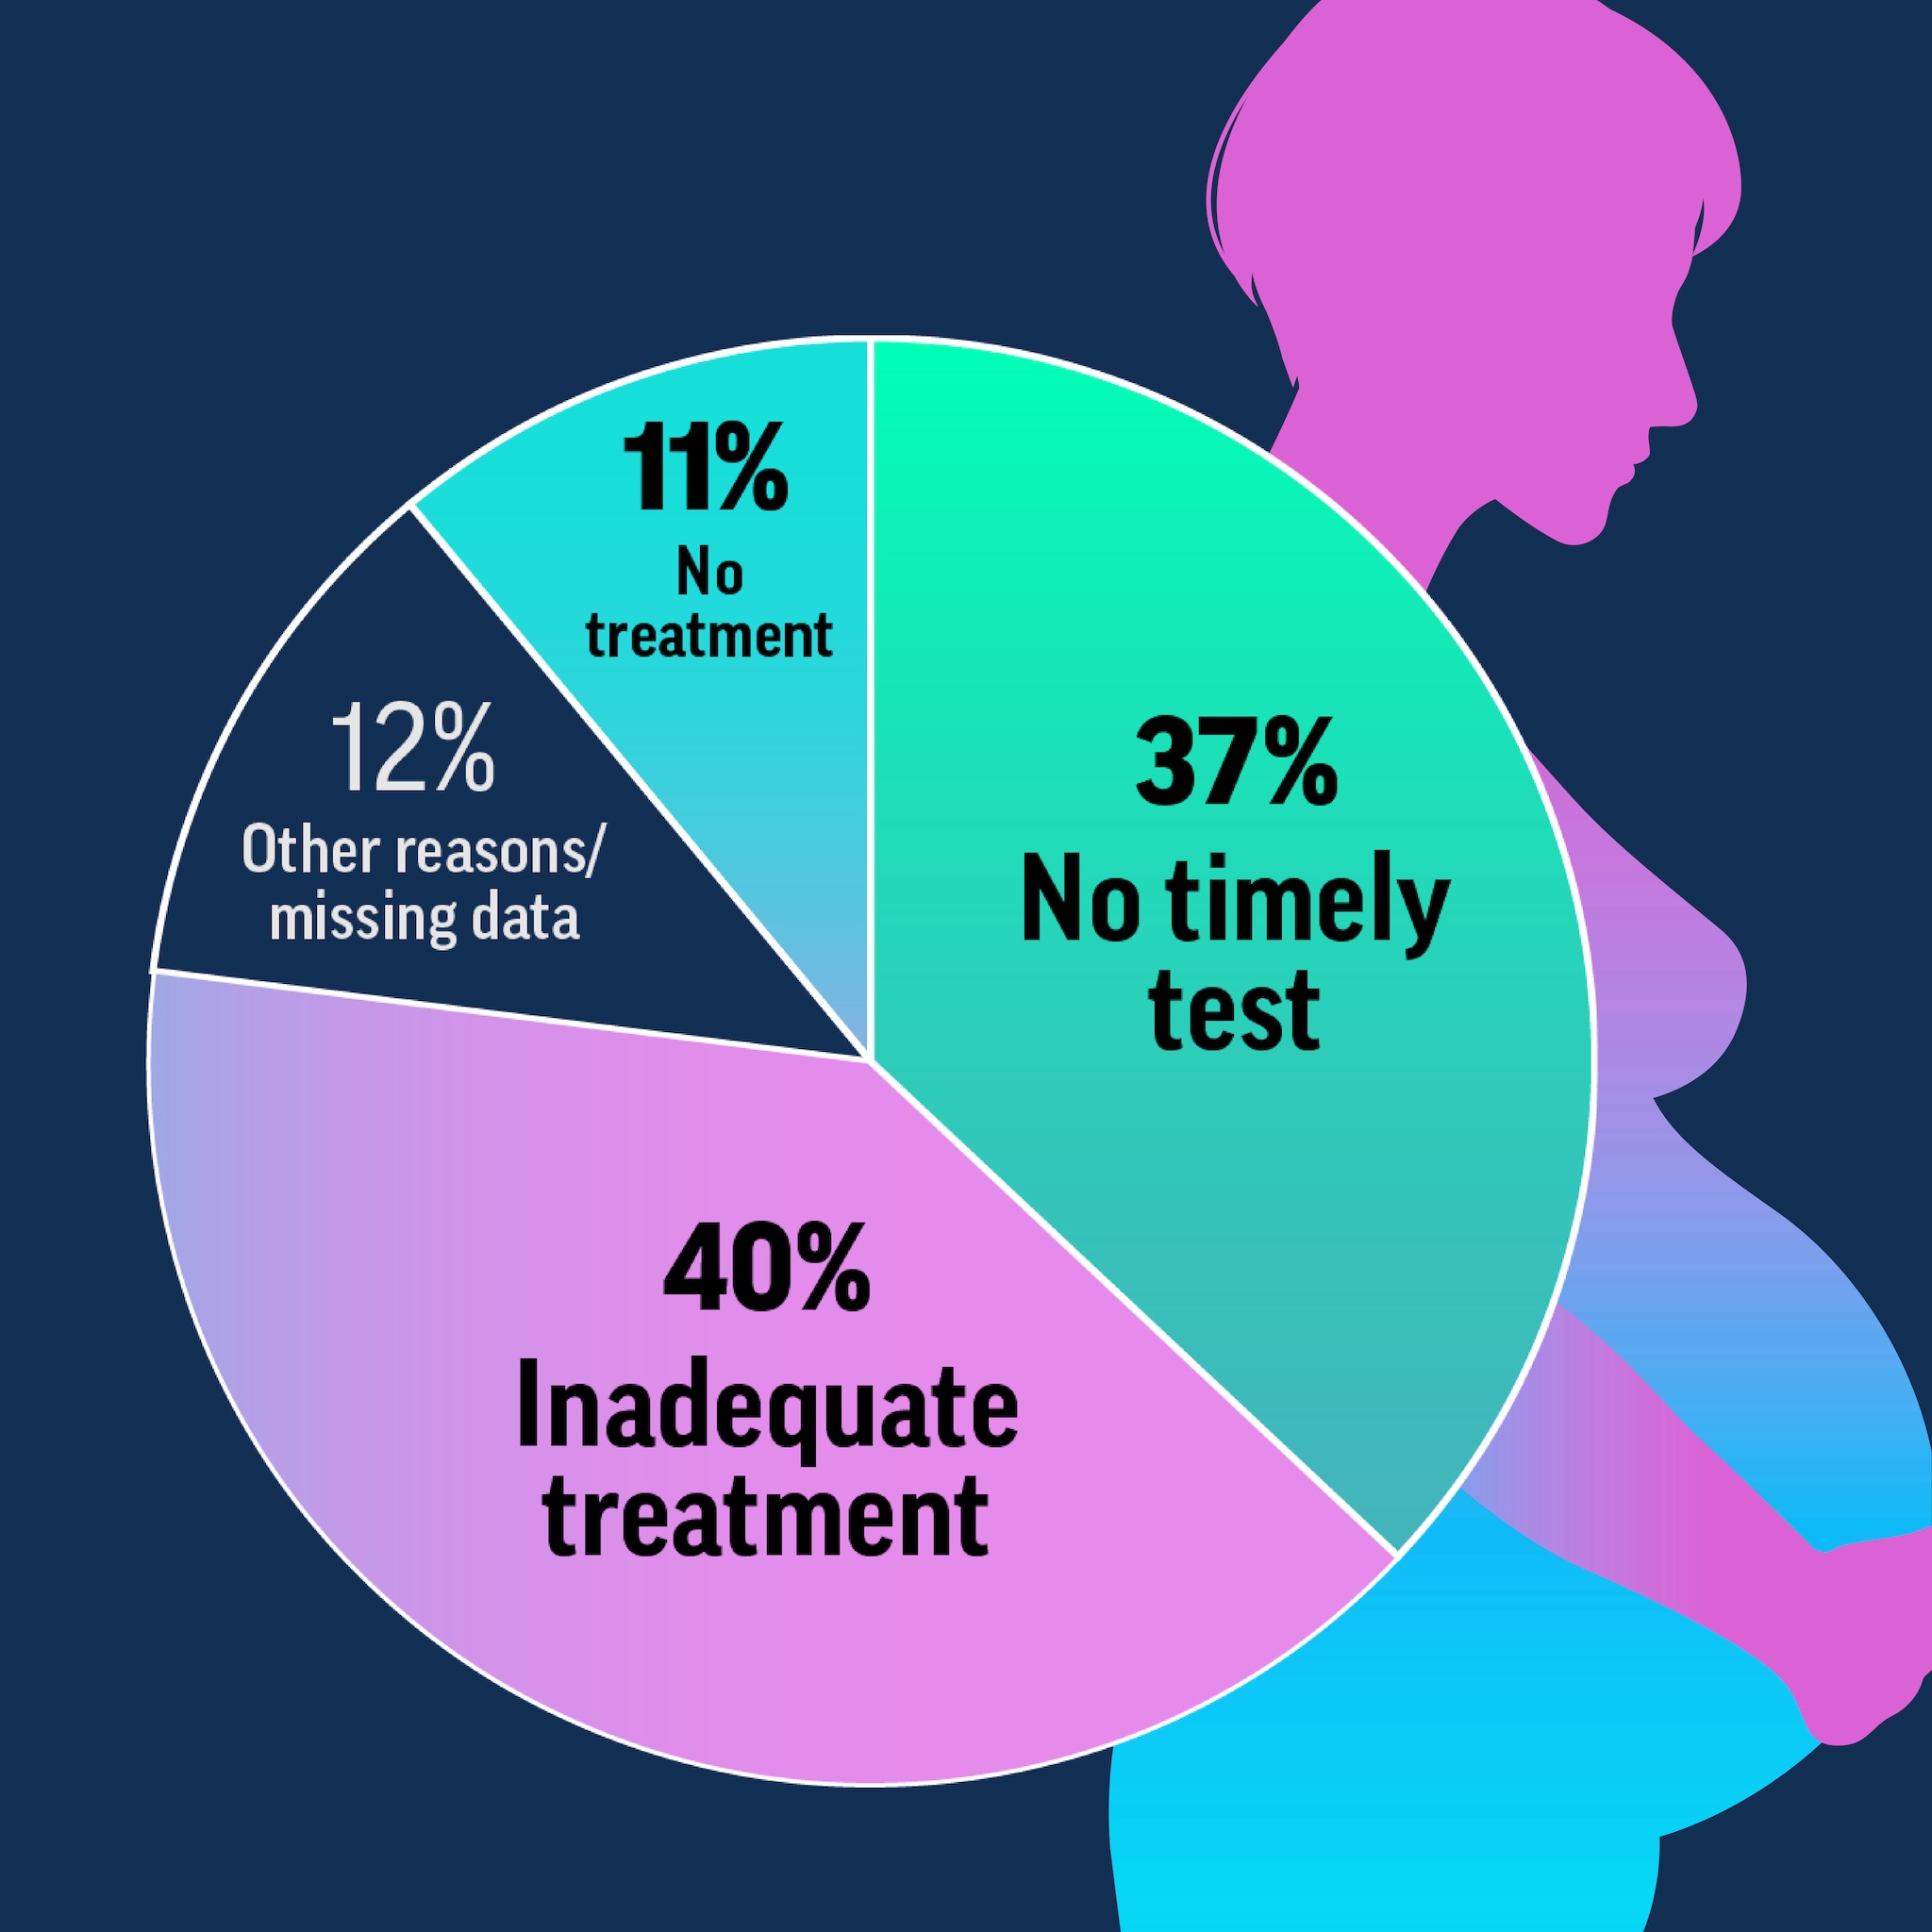 Infographic 2: Timely Syphilis Testing and Treatment During Pregnancy Could Have Prevented Almost 90% of Cases